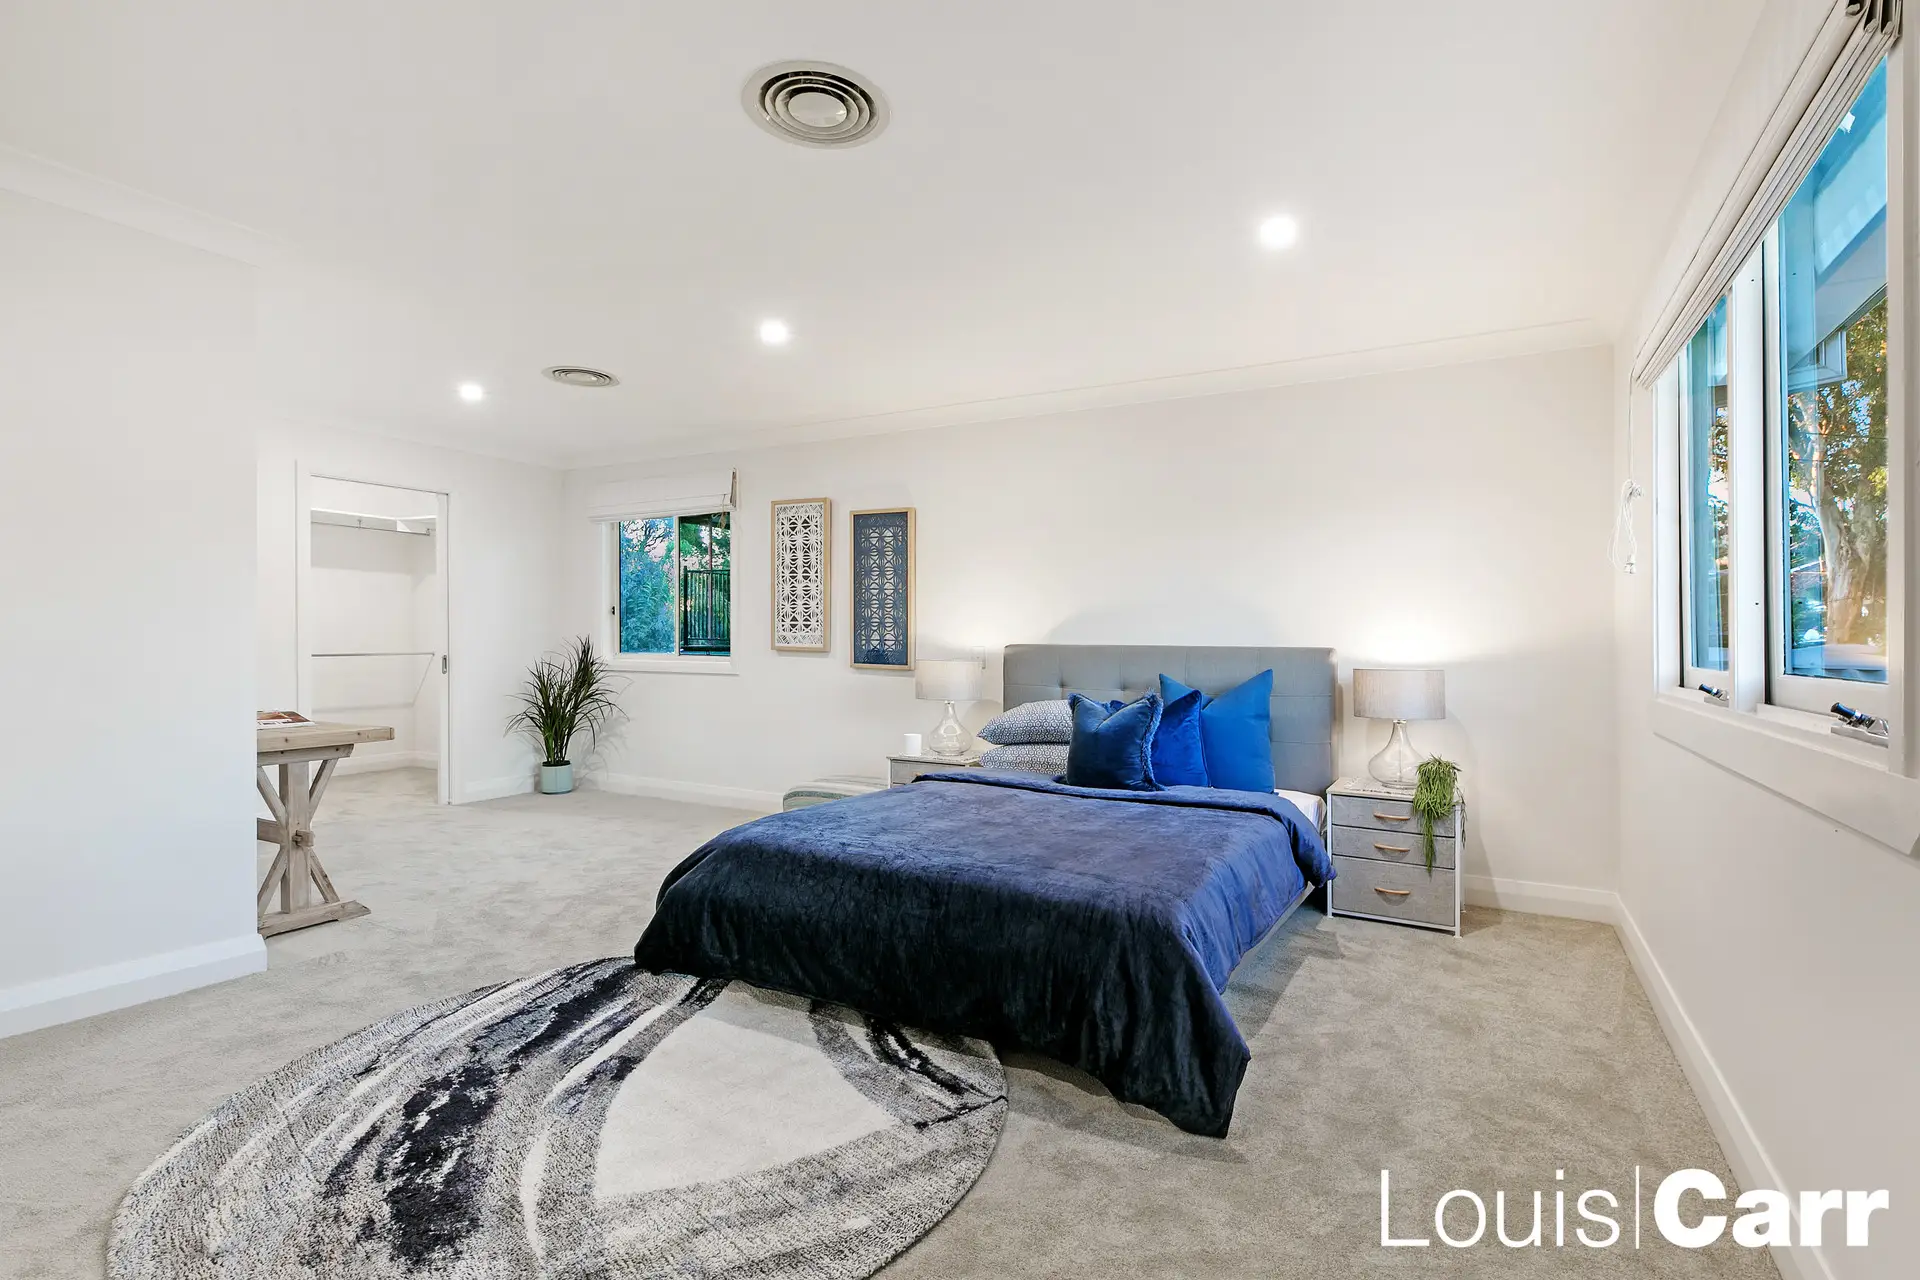 Photo #8: 94 Tamboura Avenue, Baulkham Hills - Sold by Louis Carr Real Estate